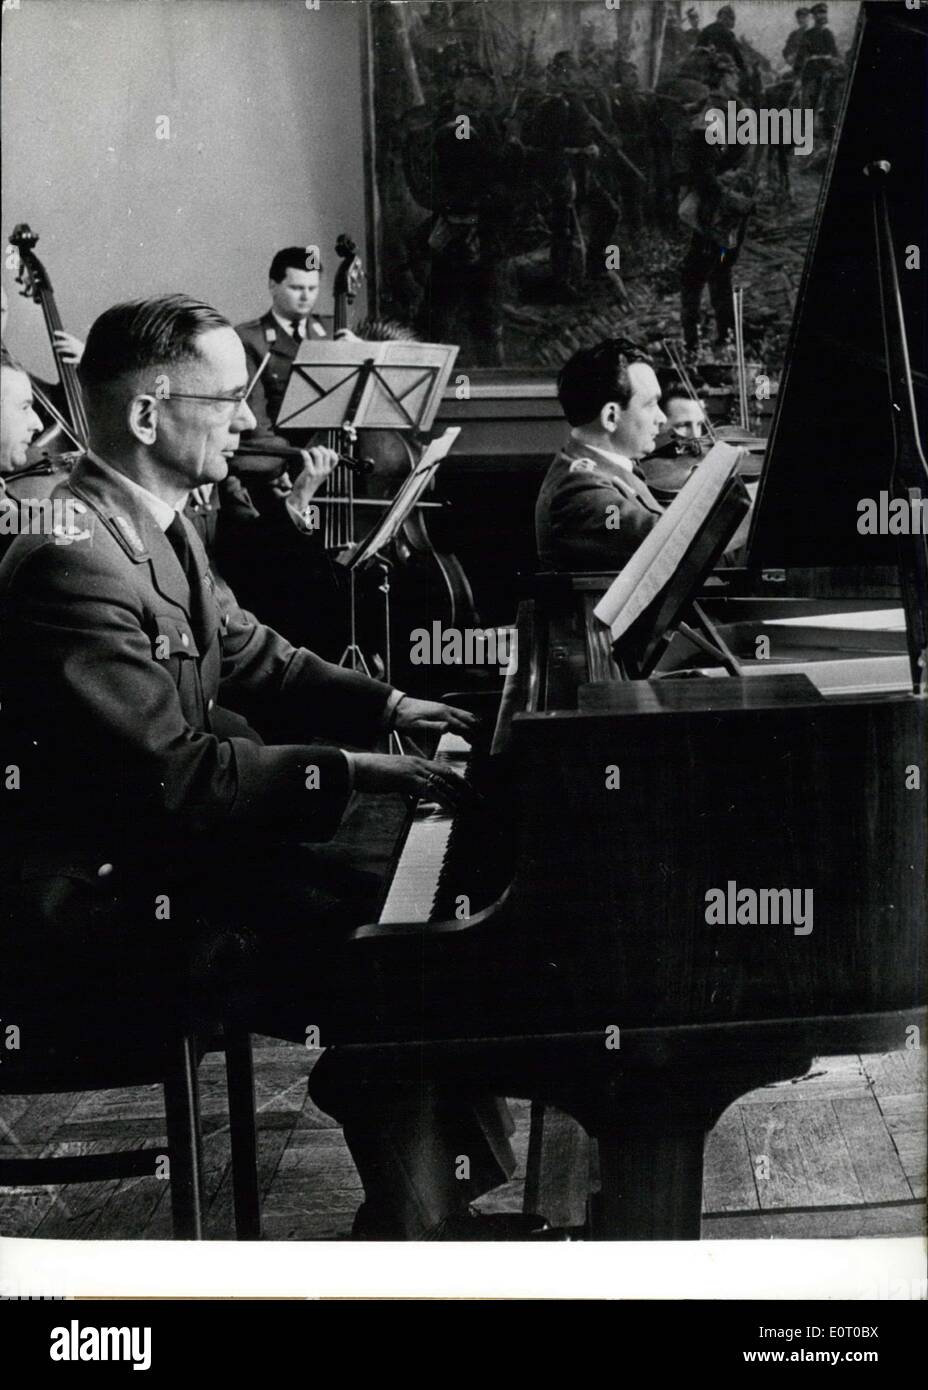 Jun. 04, 1960 - Musicians among the Federal Army: General of the Brigade Ulrich de Maiziere (Ulrich De Maiziere) took over the command over the school of the Federal Army for Interial Management. His hobby, however, is playing the piano. He is of course an enthusiastic pianist. Photo shows General of the Brigade de Maiziere playing during a chamber-concert with music by Johann Sebastian Bach at the casino of the school of the Federal Army at Koblenz-Pfaffendorf. Stock Photo